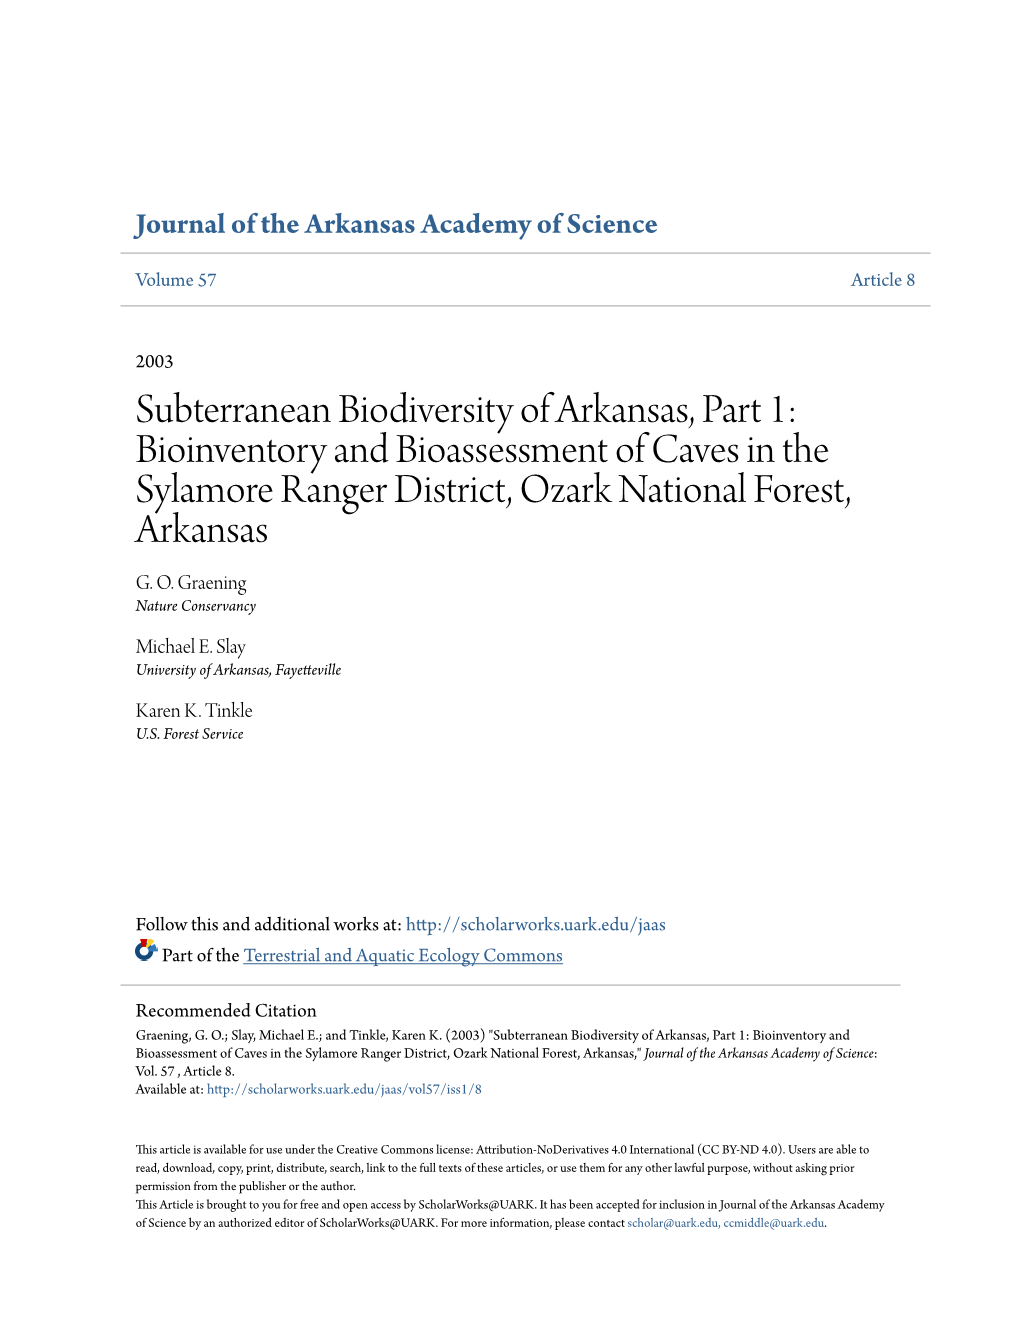 Subterranean Biodiversity of Arkansas, Part 1: Bioinventory and Bioassessment of Caves in the Sylamore Ranger District, Ozark National Forest, Arkansas G